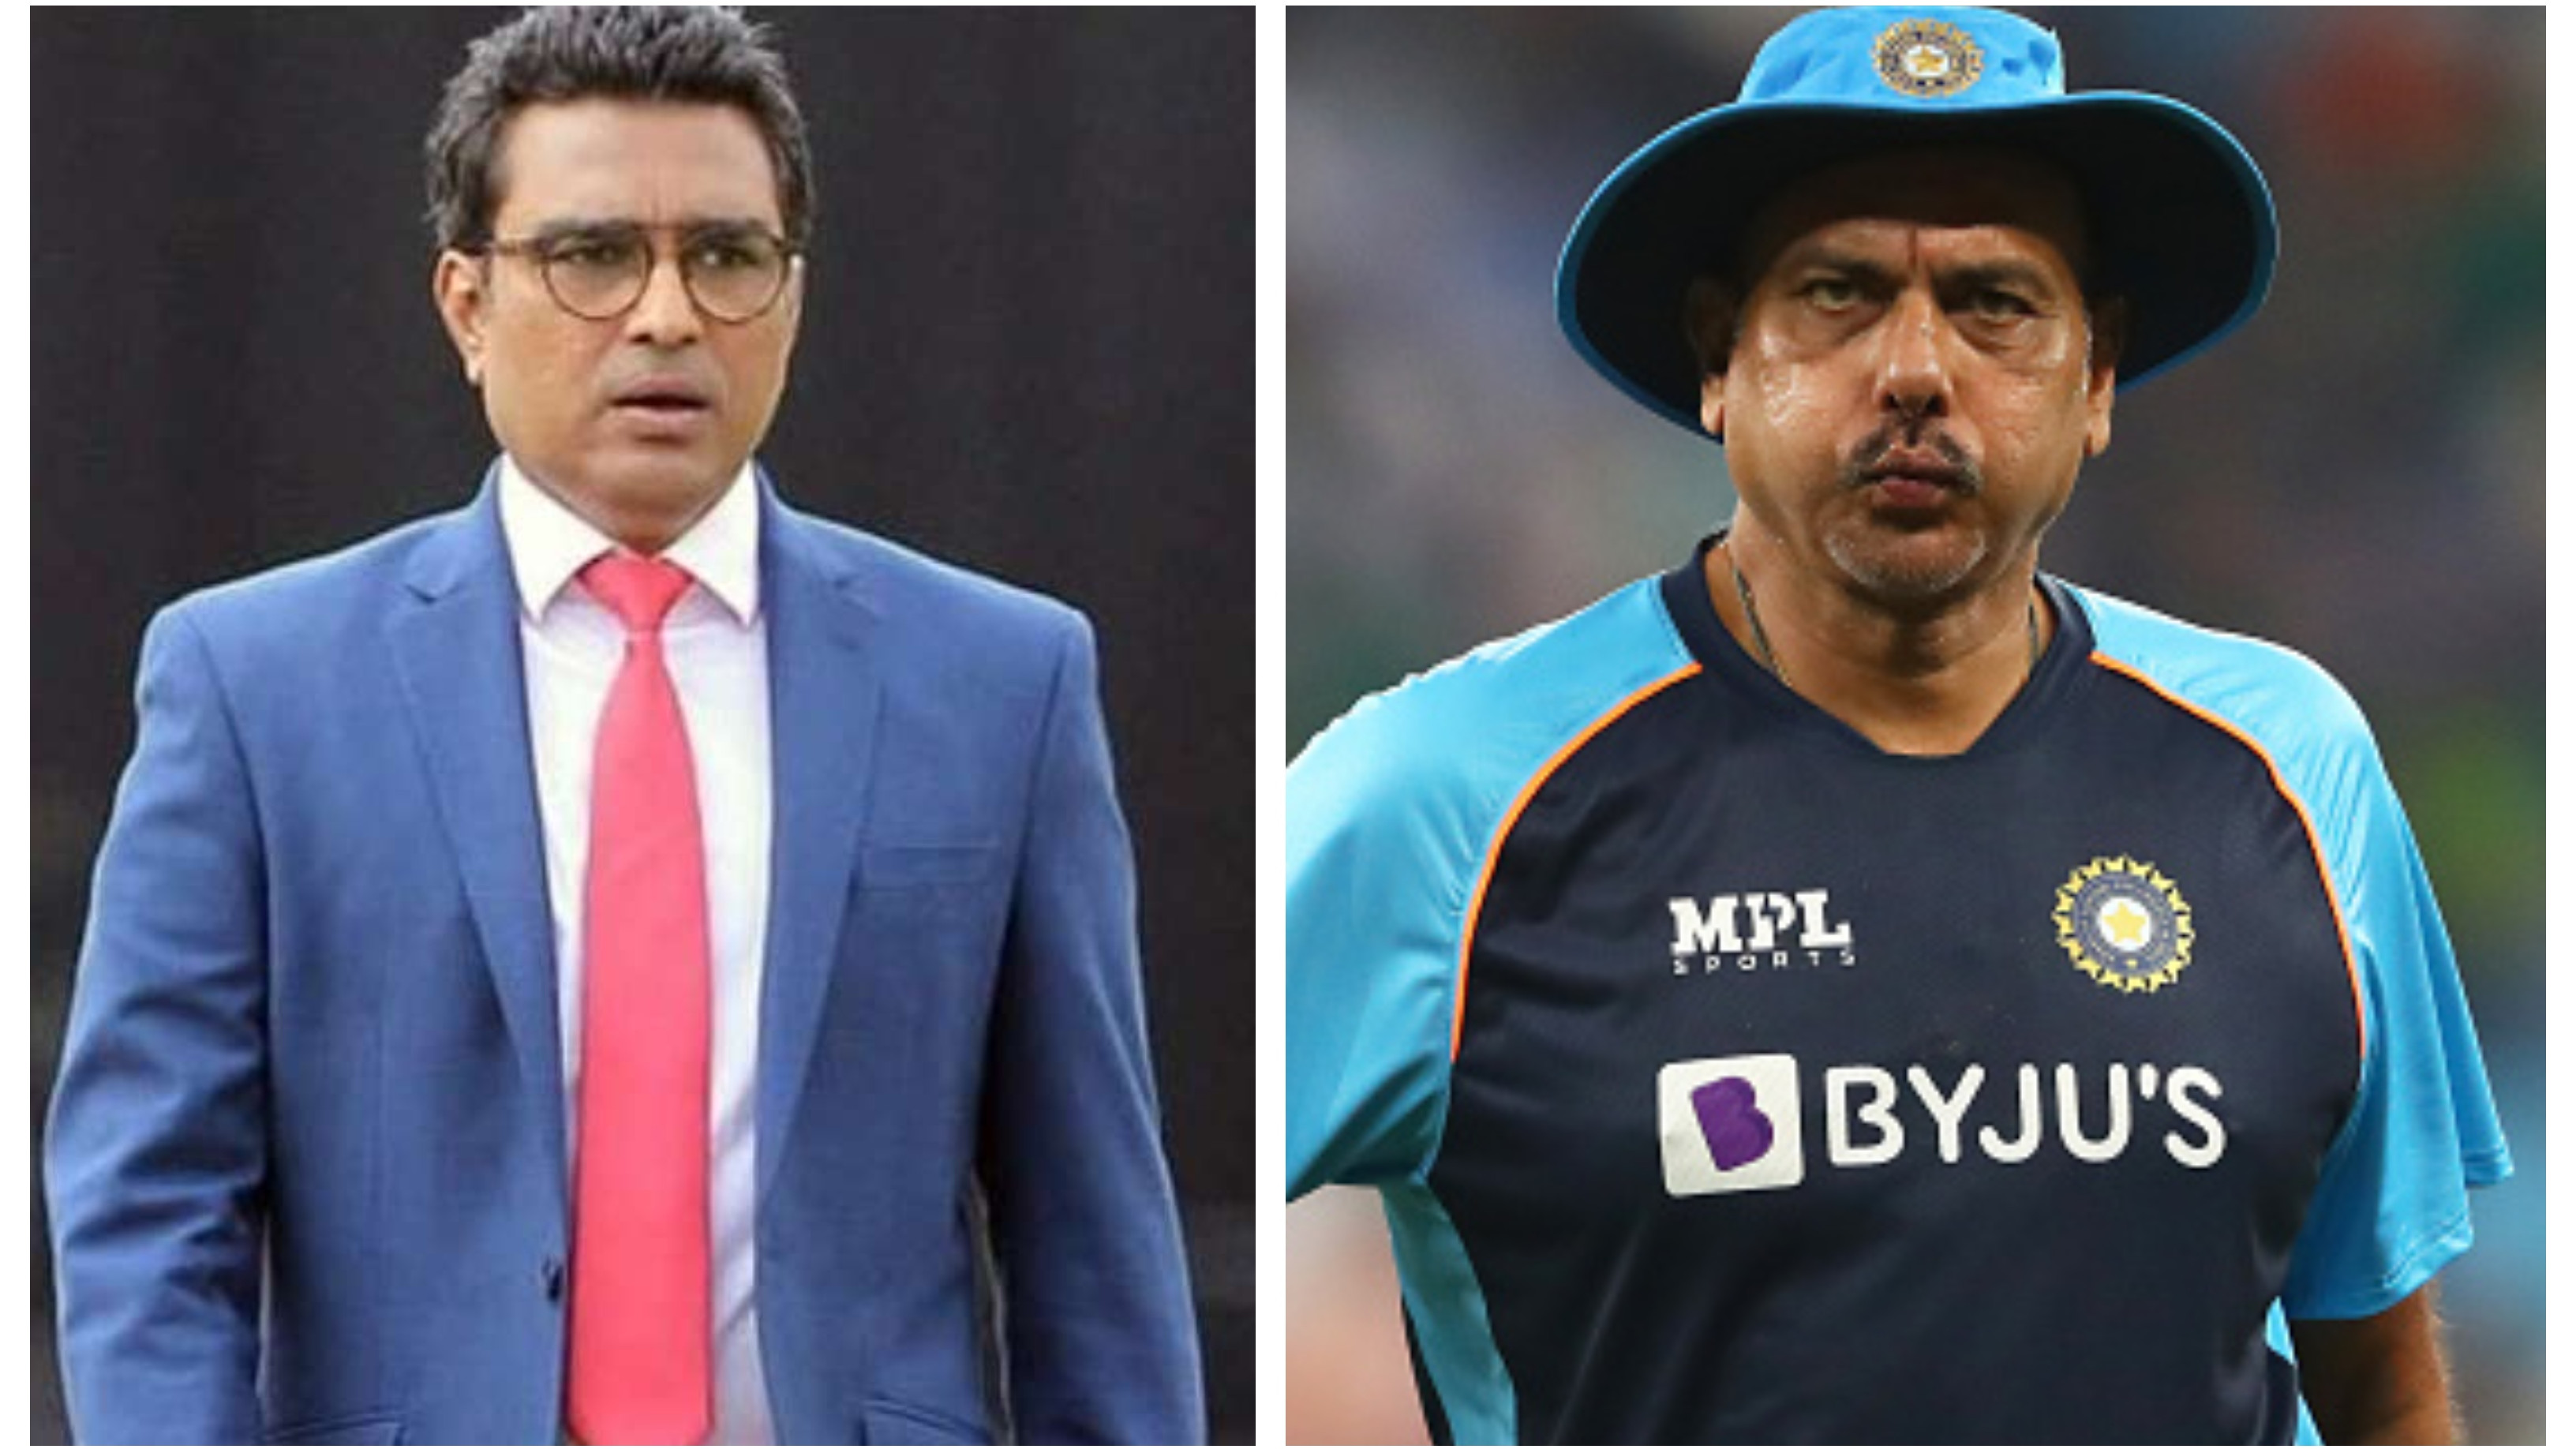 ‘You can see agenda behind it’, Manjrekar says Shastri 2.0 doesn't make intelligent comments